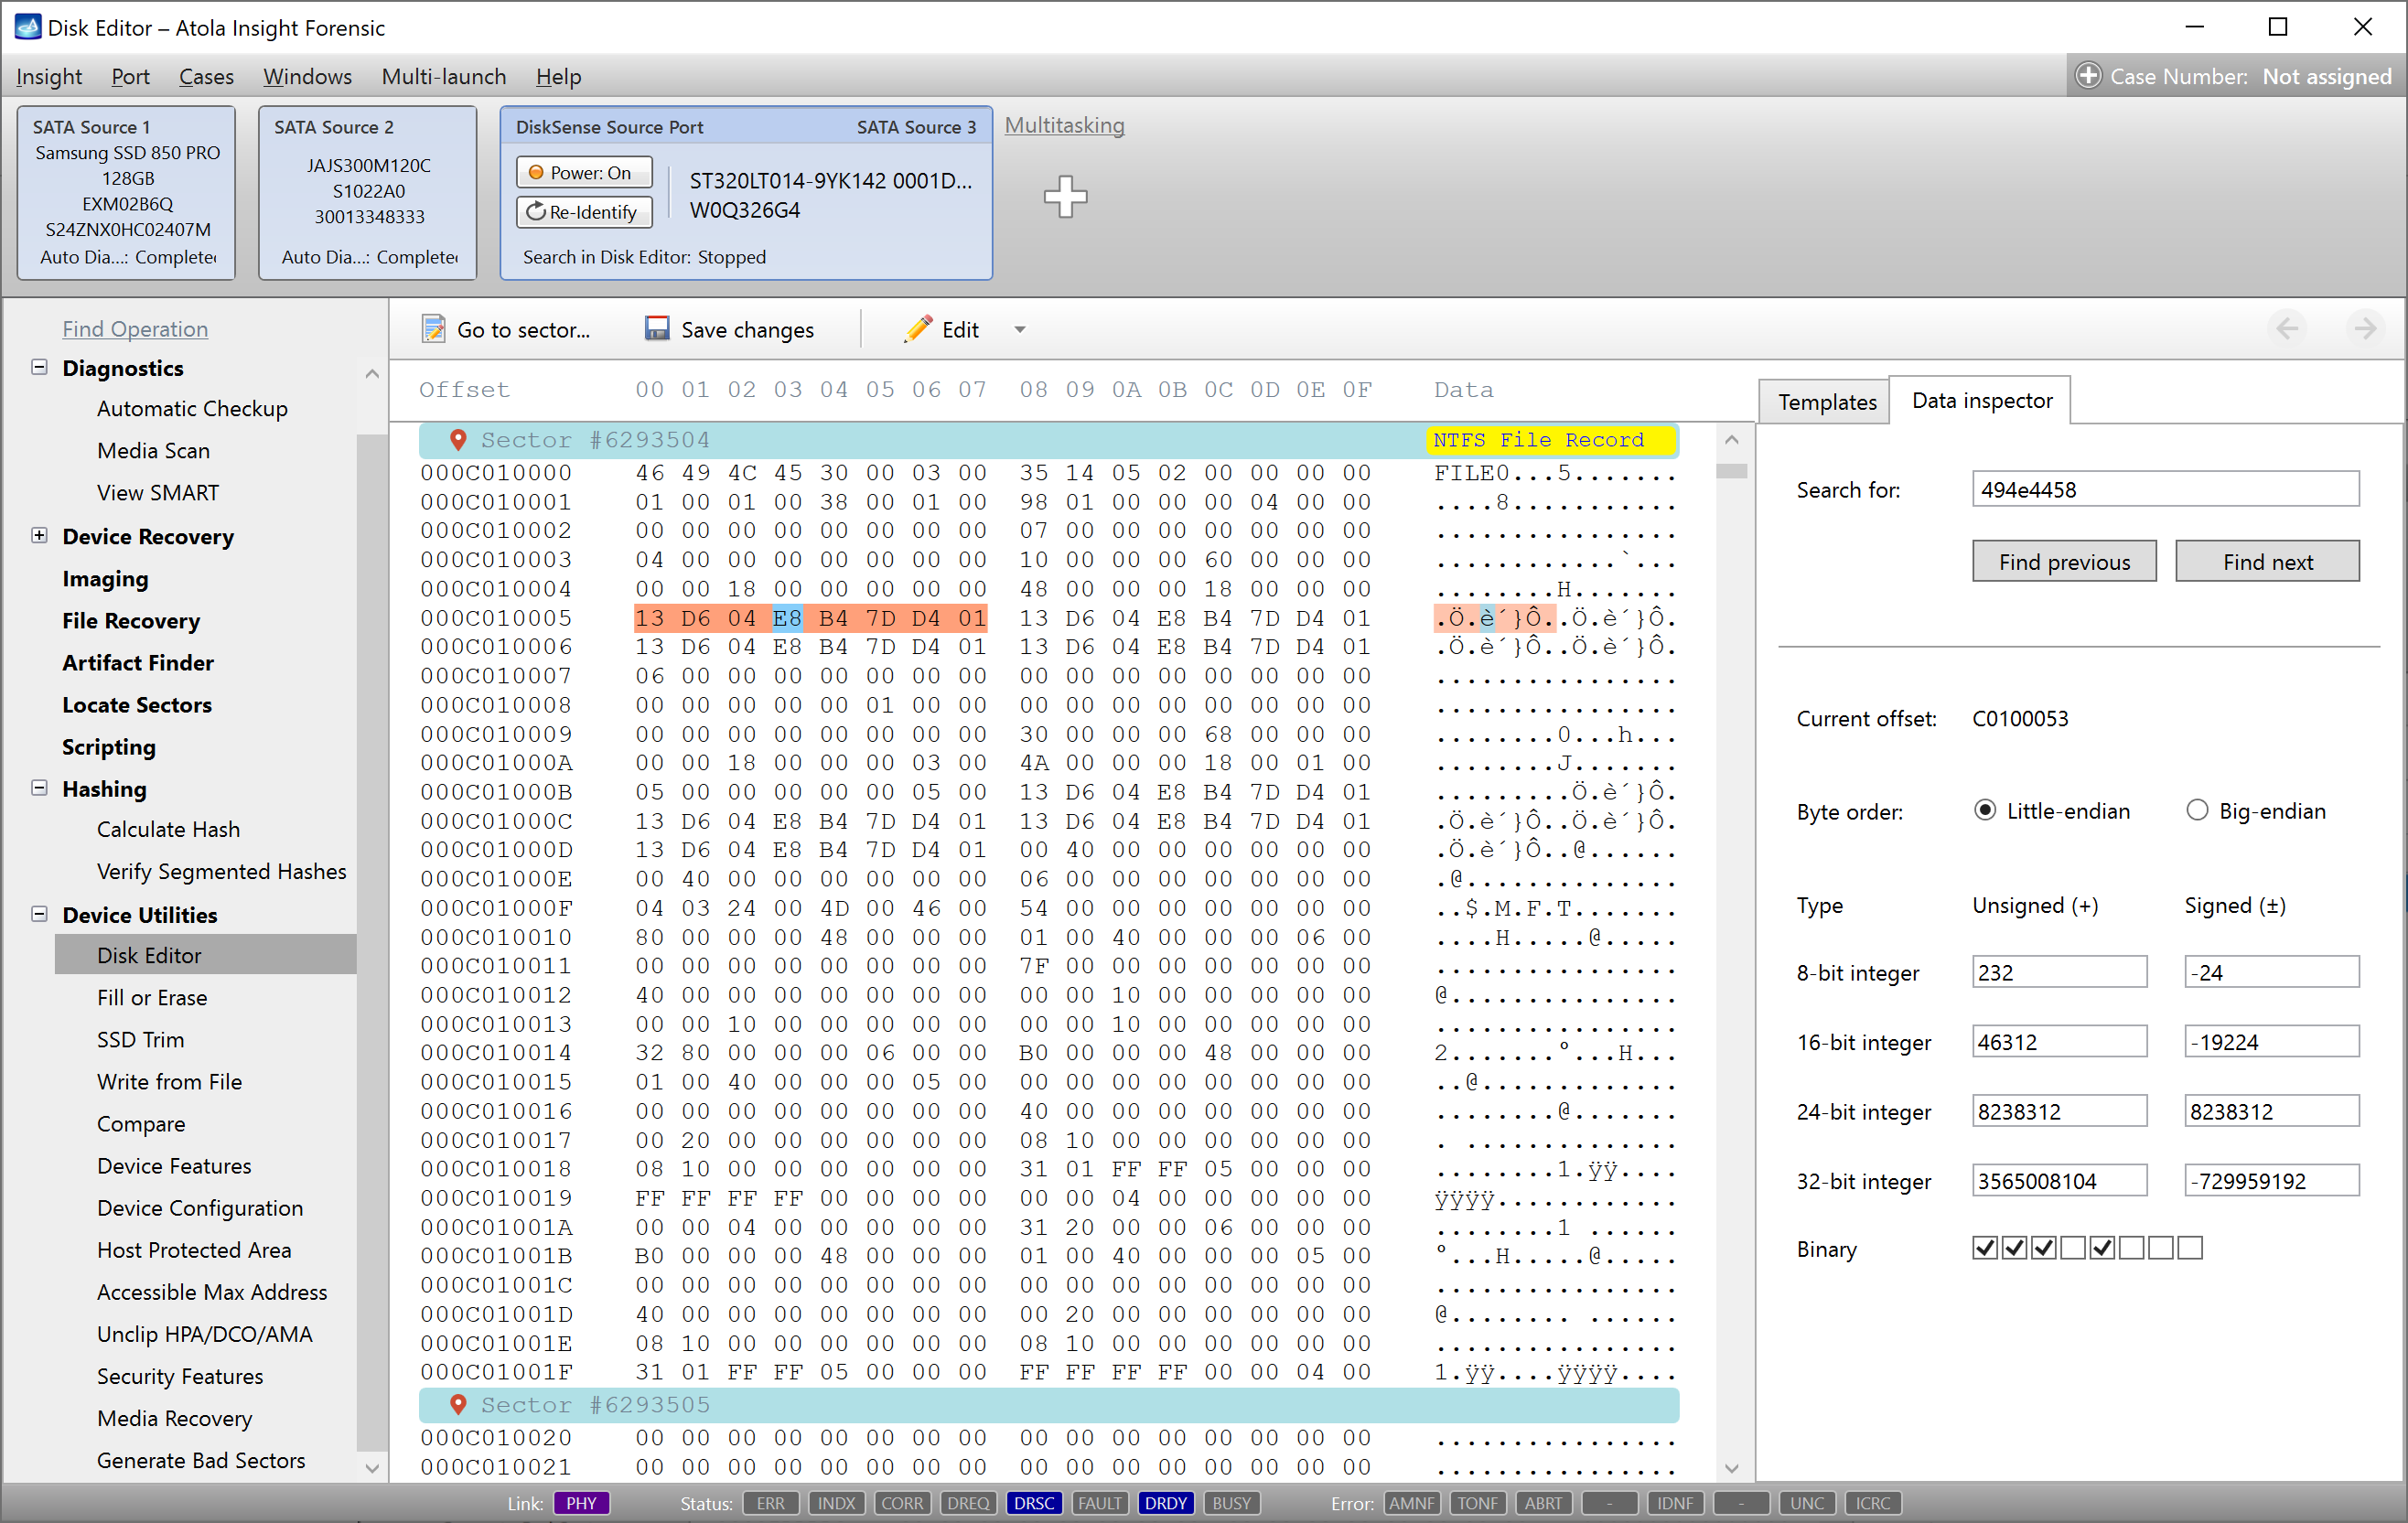 The Data inspector tab in the Disk editor.